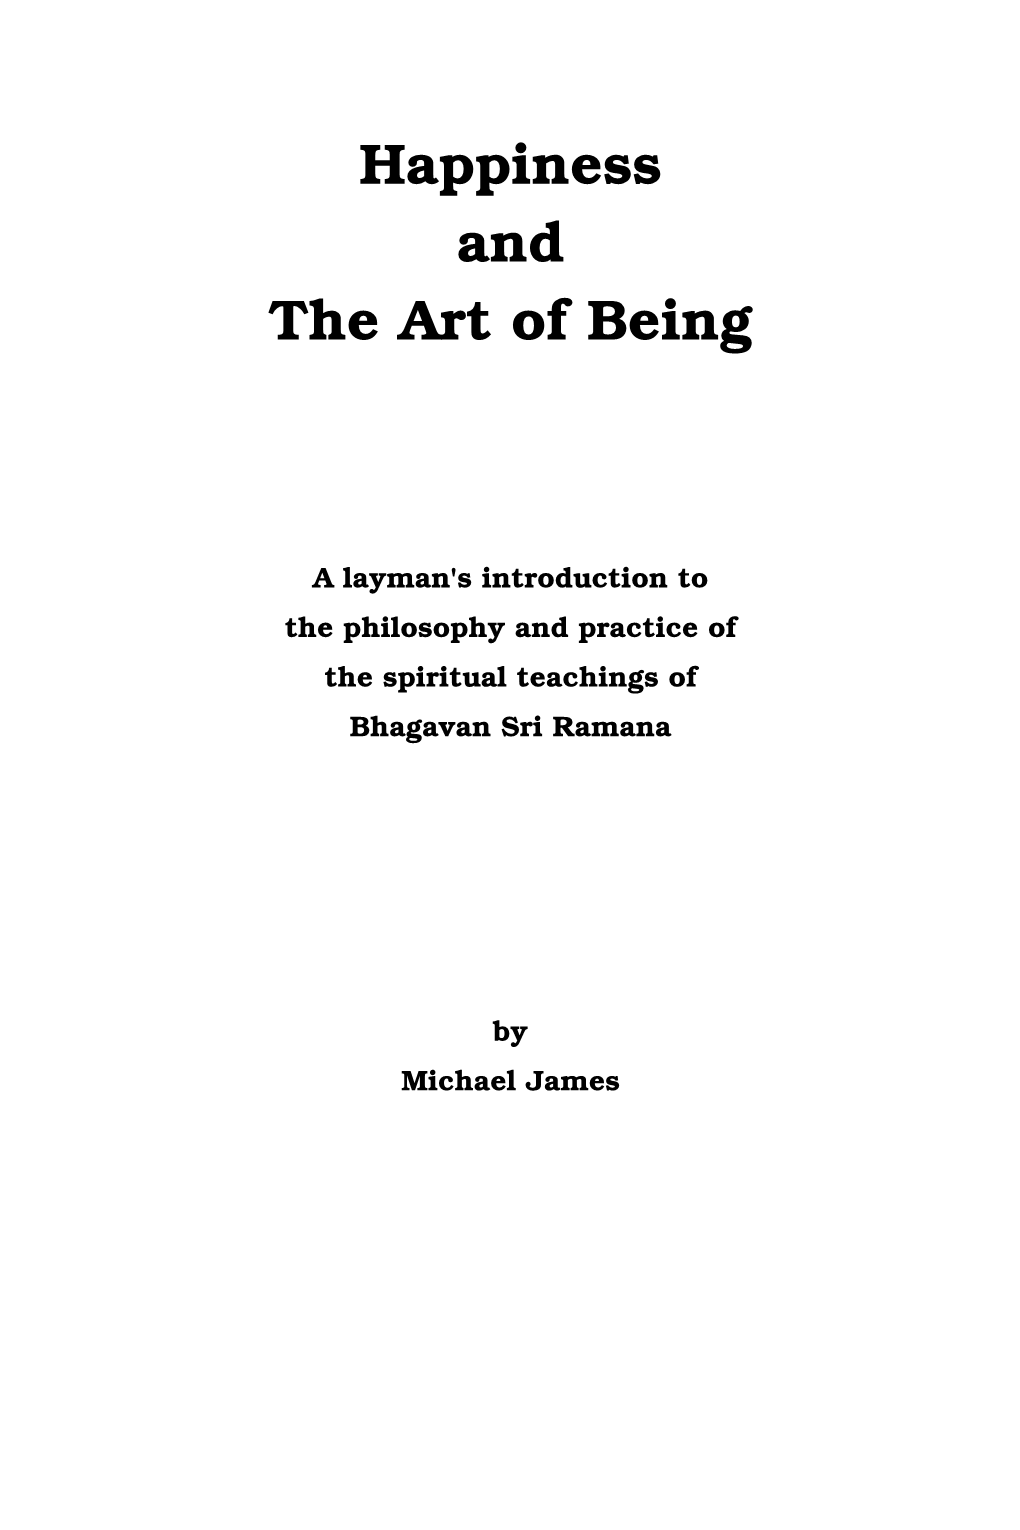 Happiness and the Art of Being – First PDF Edition (December 2006)